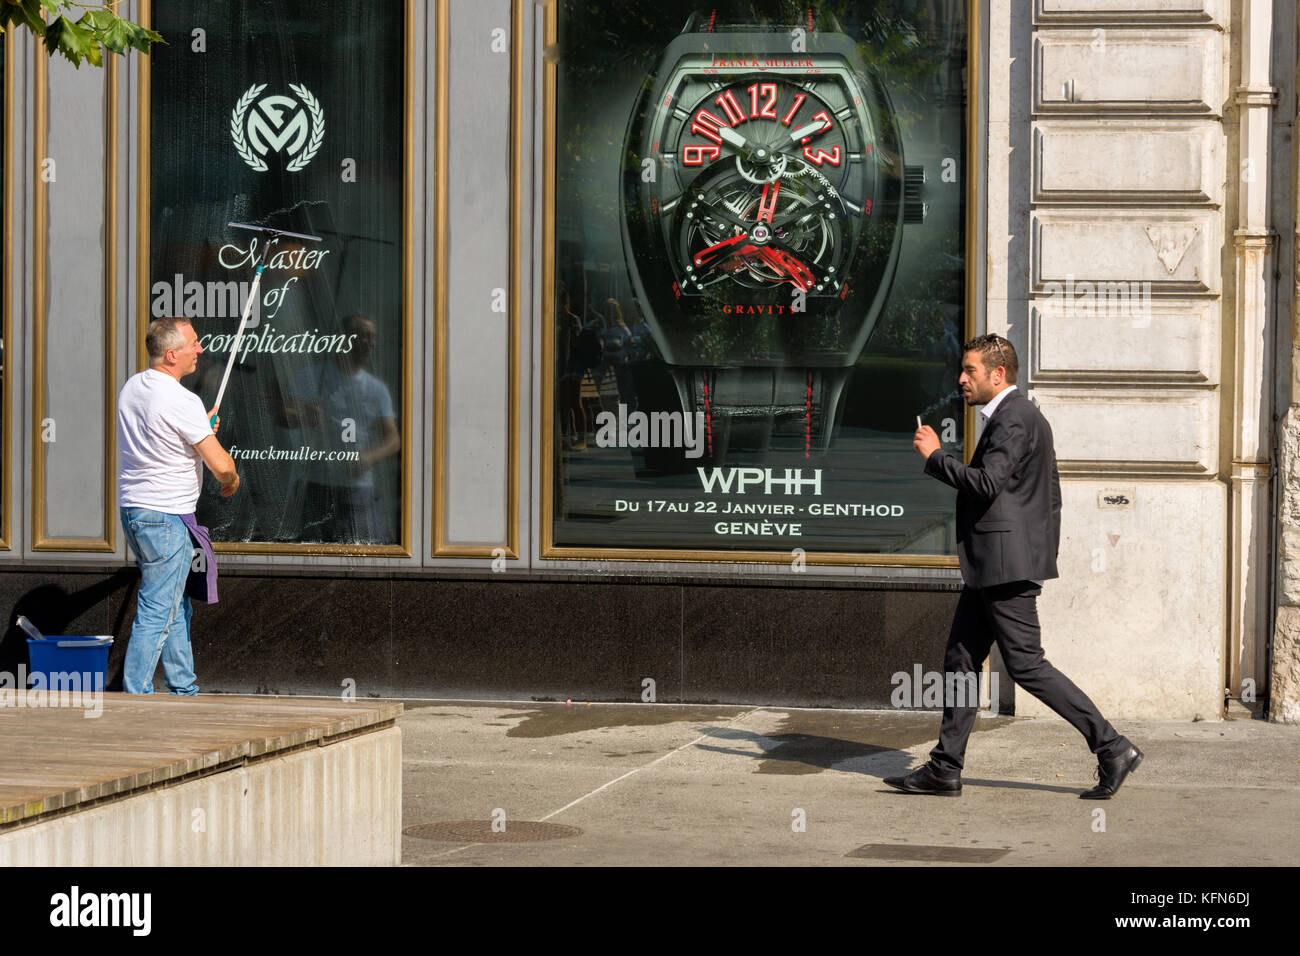 GENEVA, SWITZERLAND - AUGUST 29. Square Belair, the shop of a great manufacturer of switzerland watches Stock Photo